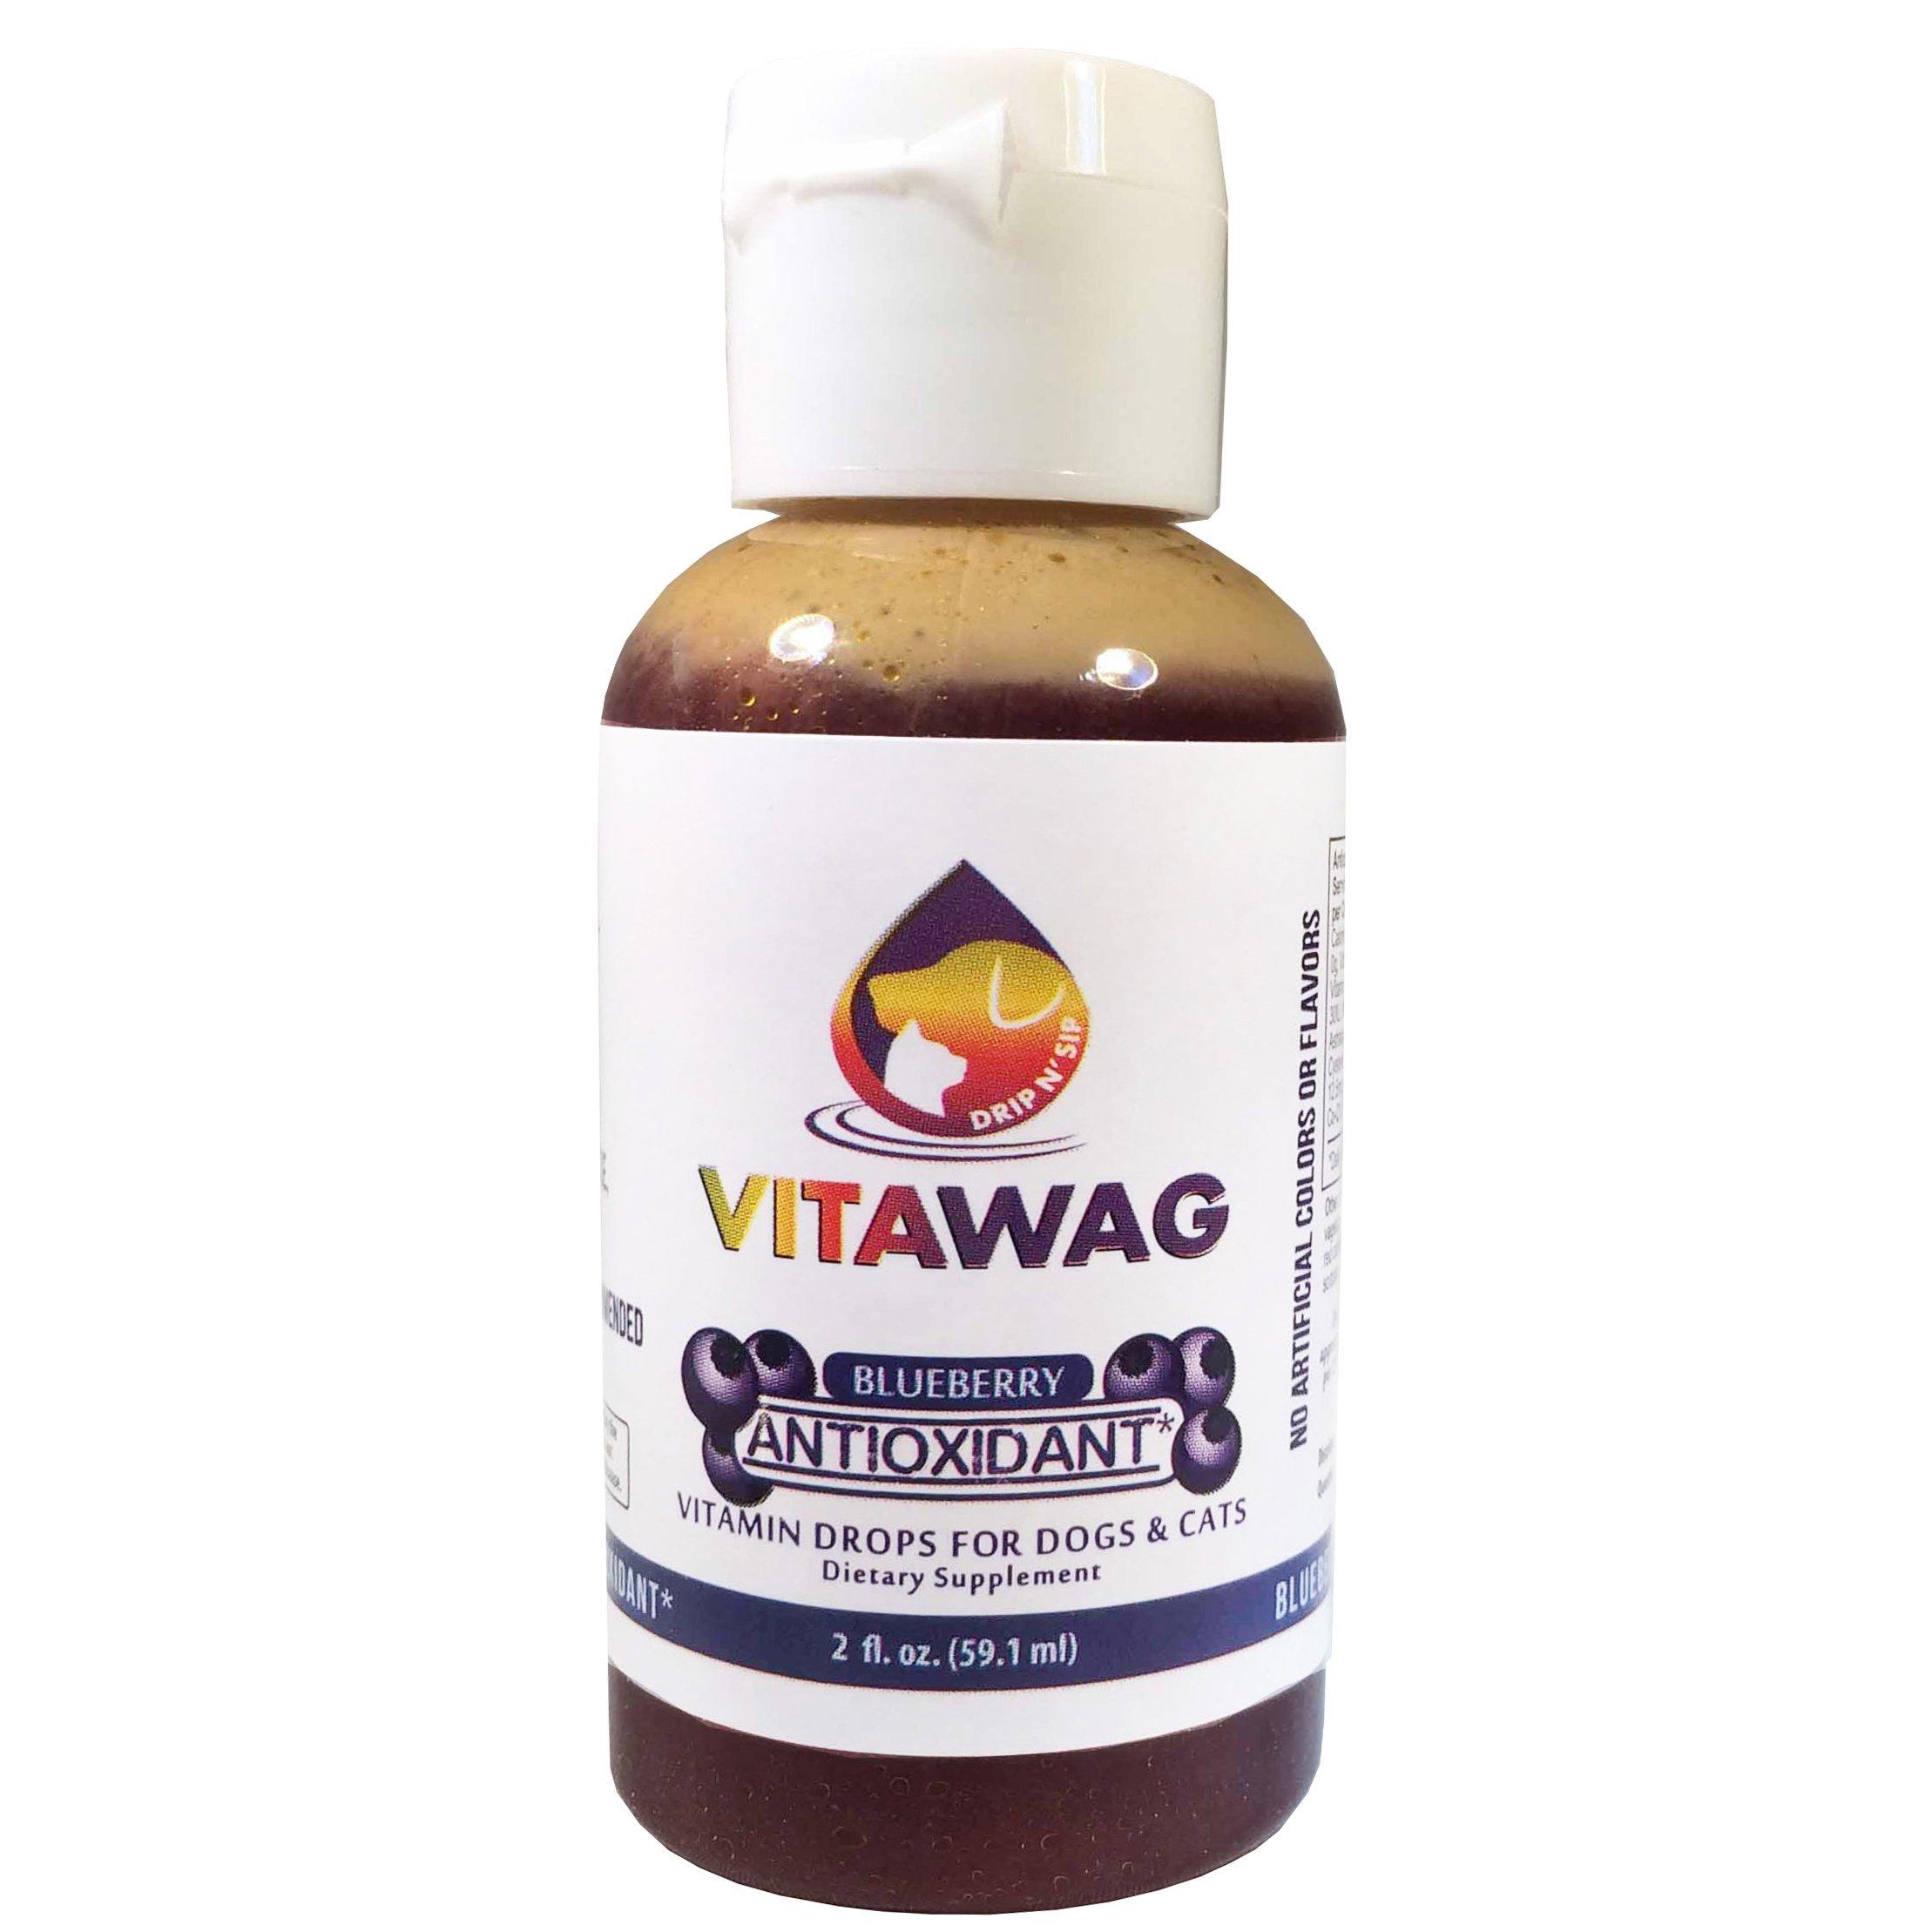 VITAWAg DRIP N SIP 100% All Natural Super concentrated Dog and cat Liquid Supplements w No Added Dyes chemicals and Preservatives 30-60 Day Supply Per Bottle 2 Ounces Blueberry - Anti-Oxidant